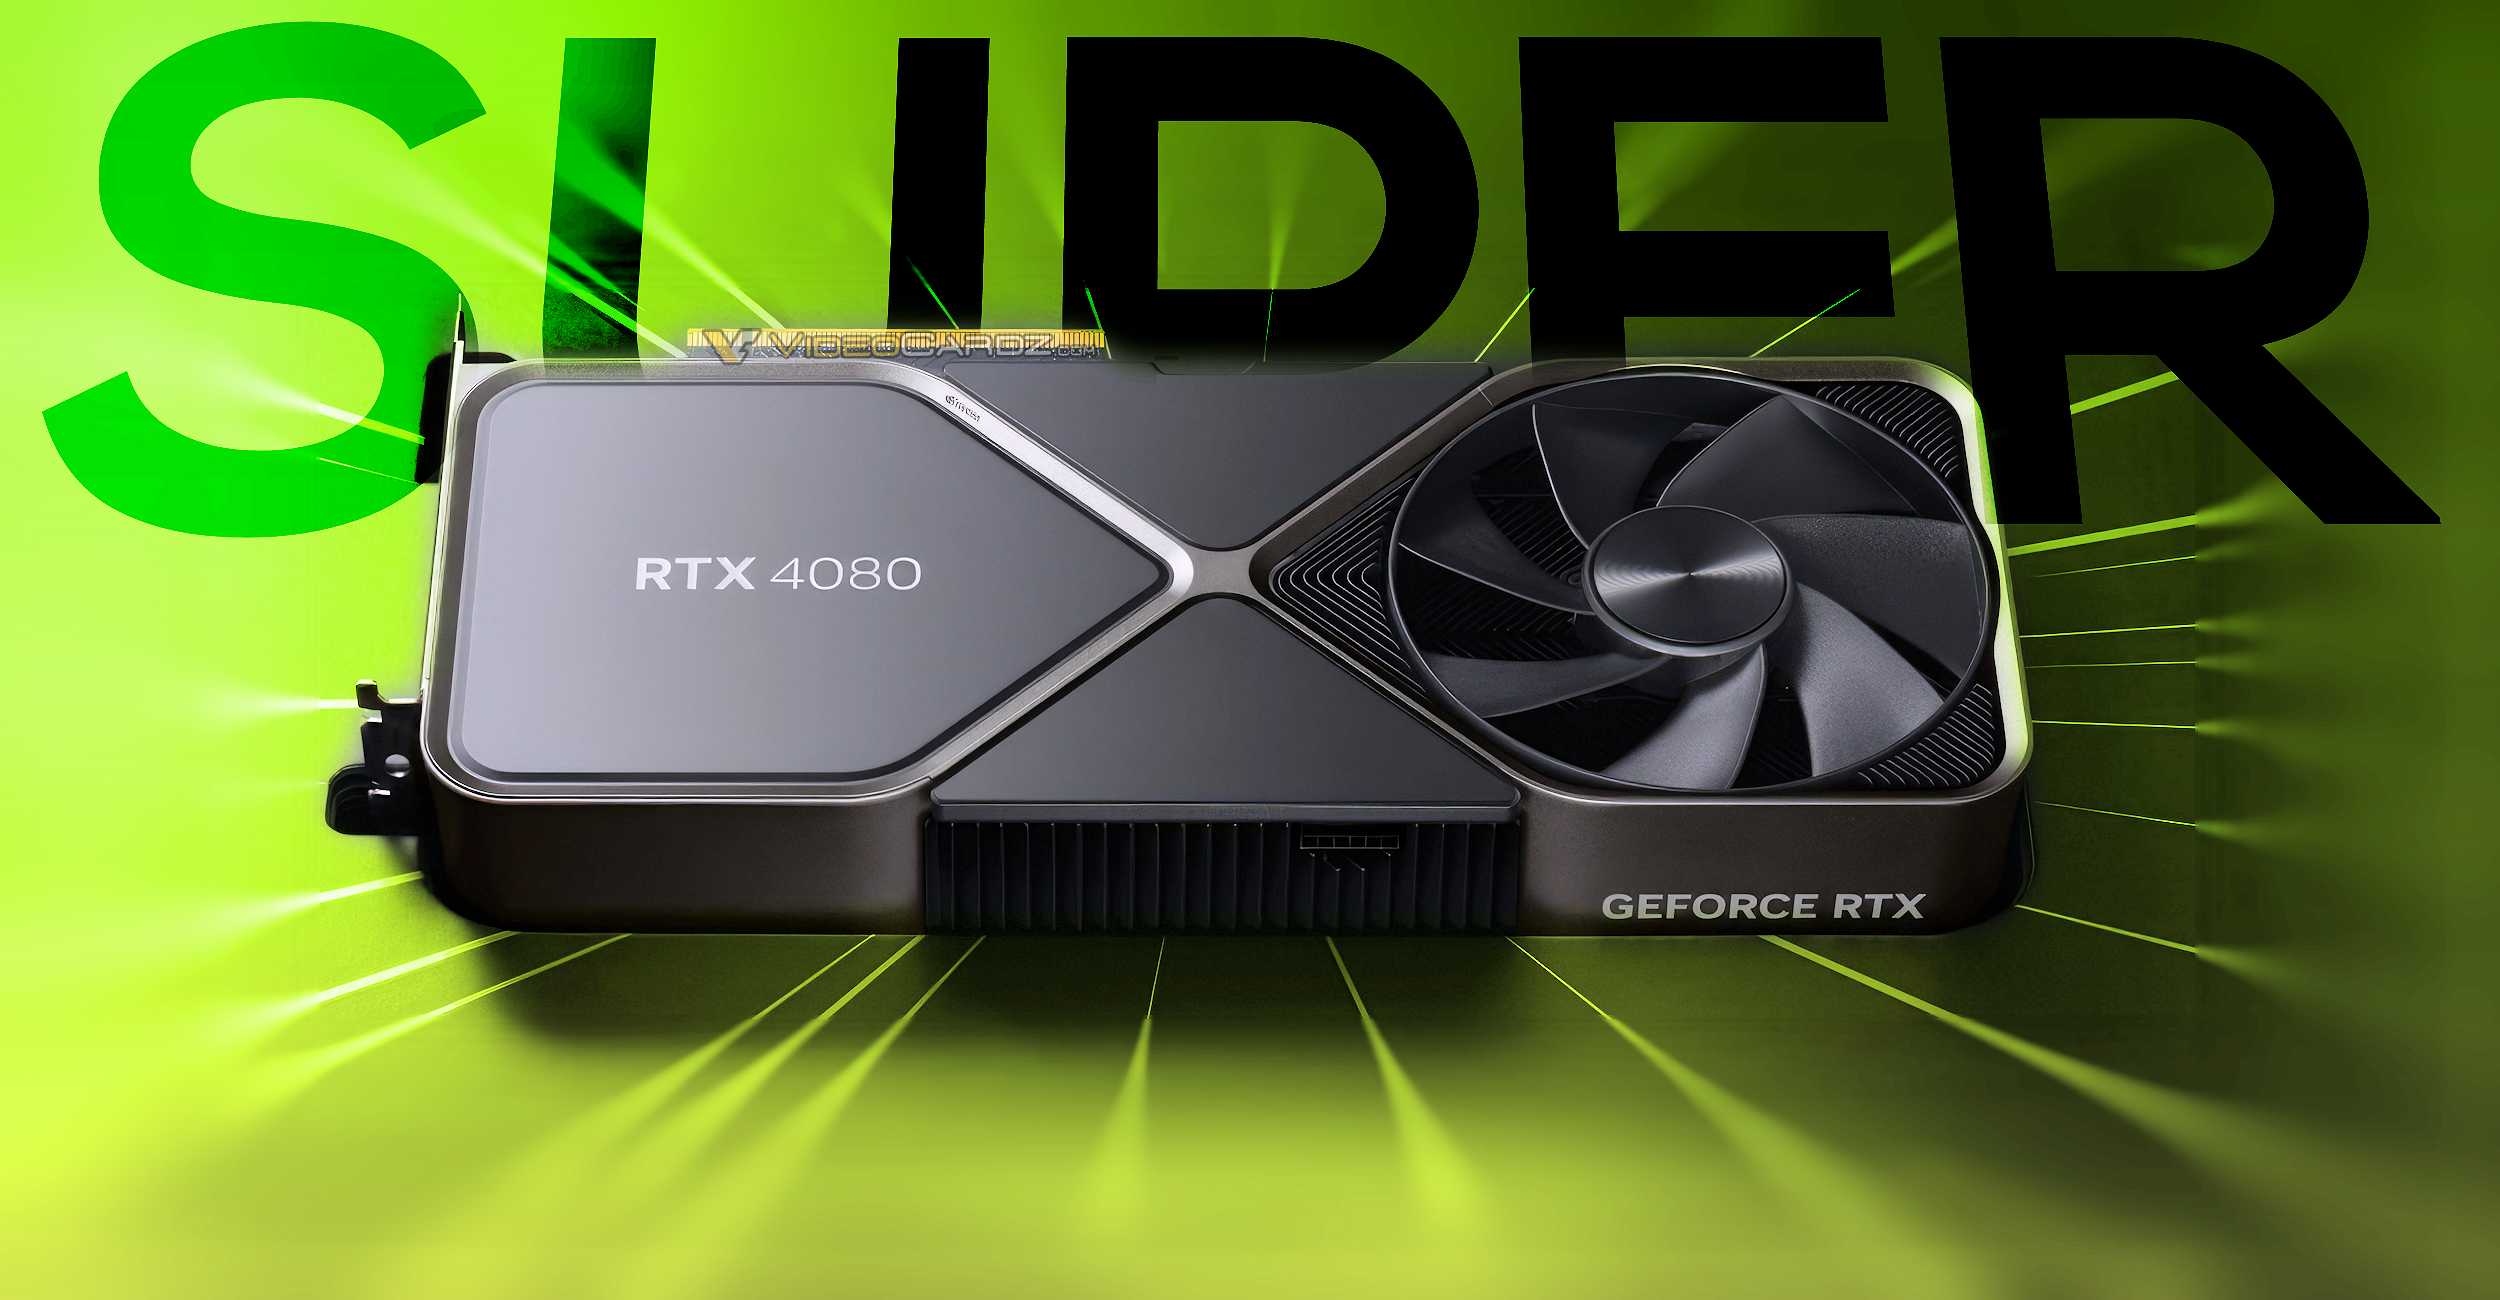 Nvidia GeForce RTX 4080 review: Asking too much